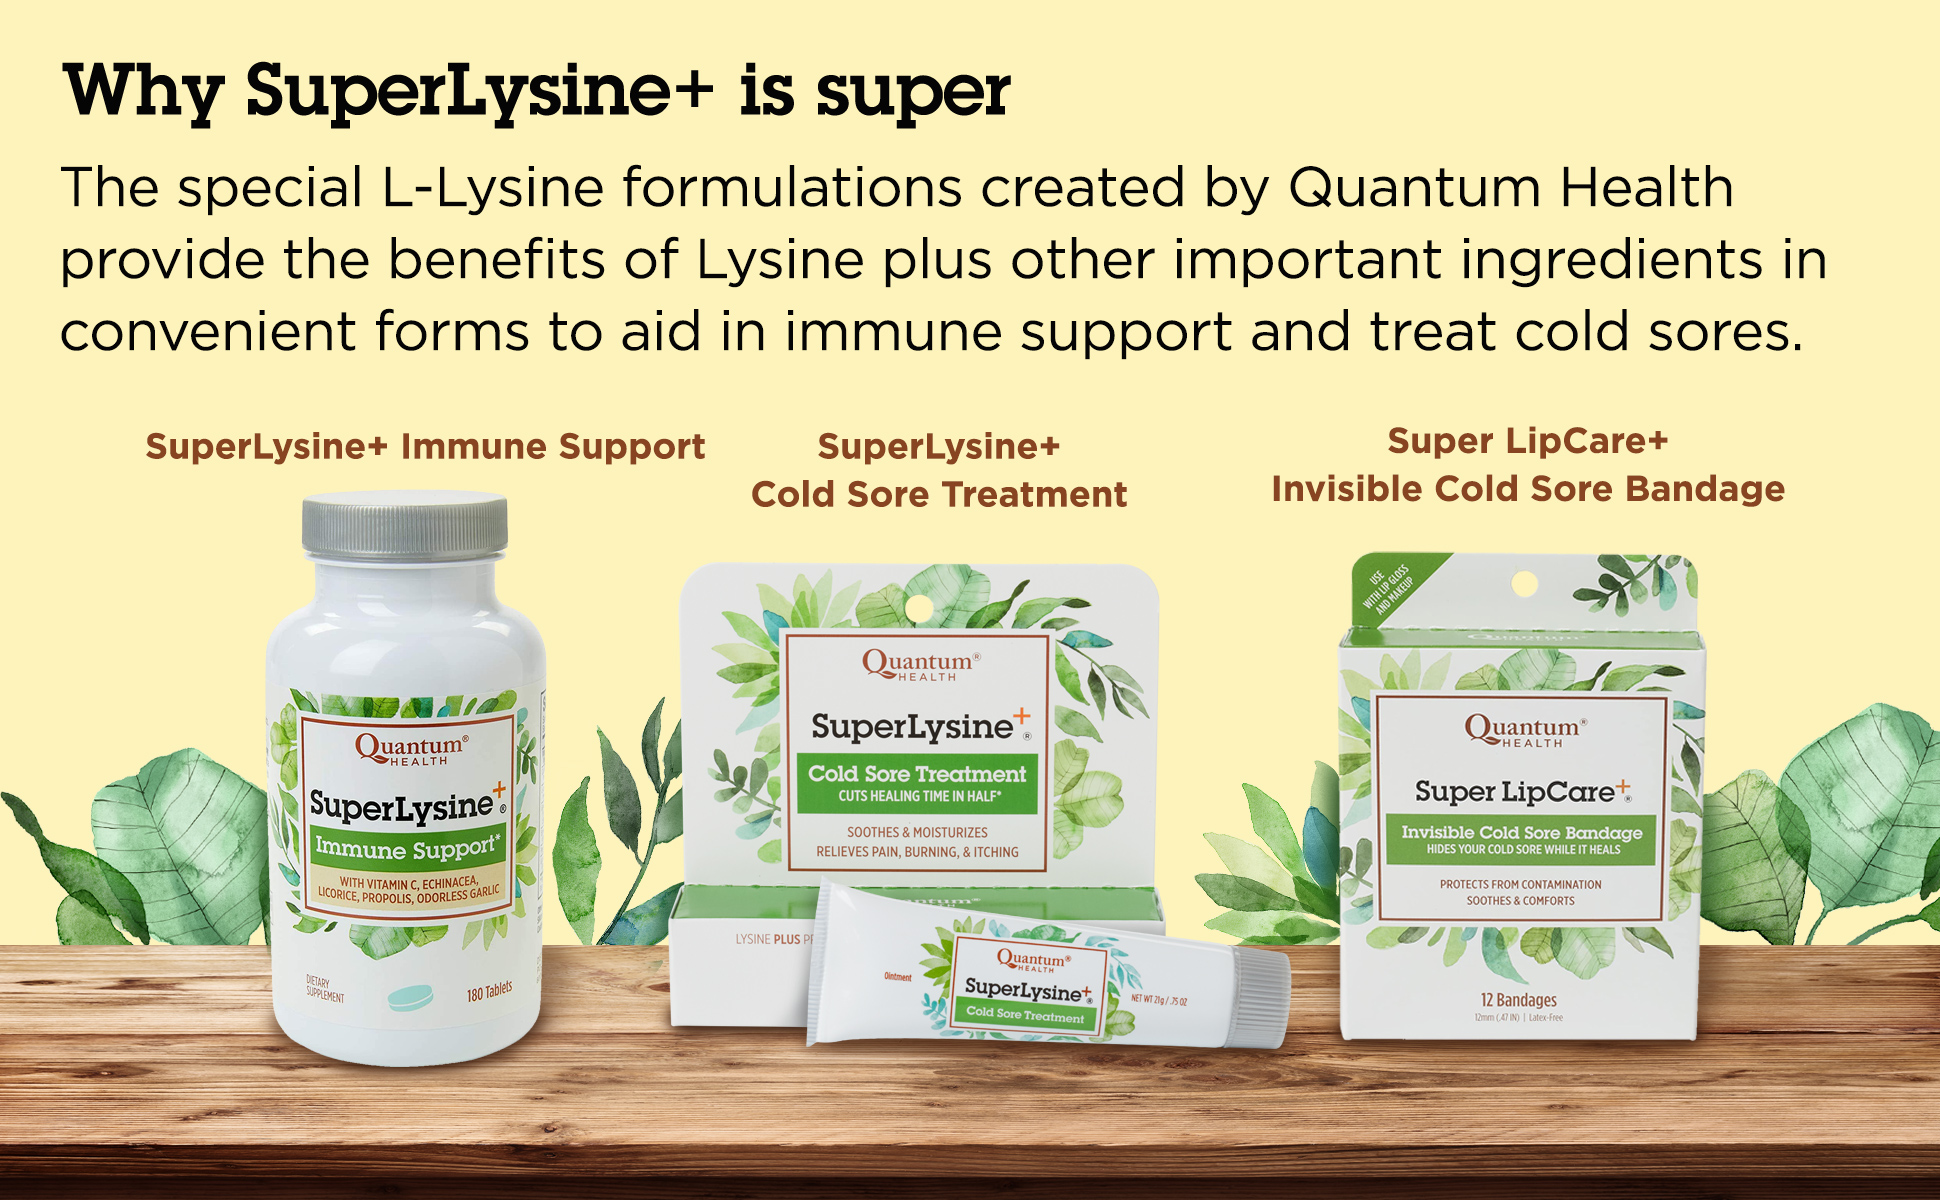 3 SuperLysine+ products, and why SuperLysine+ is so super.